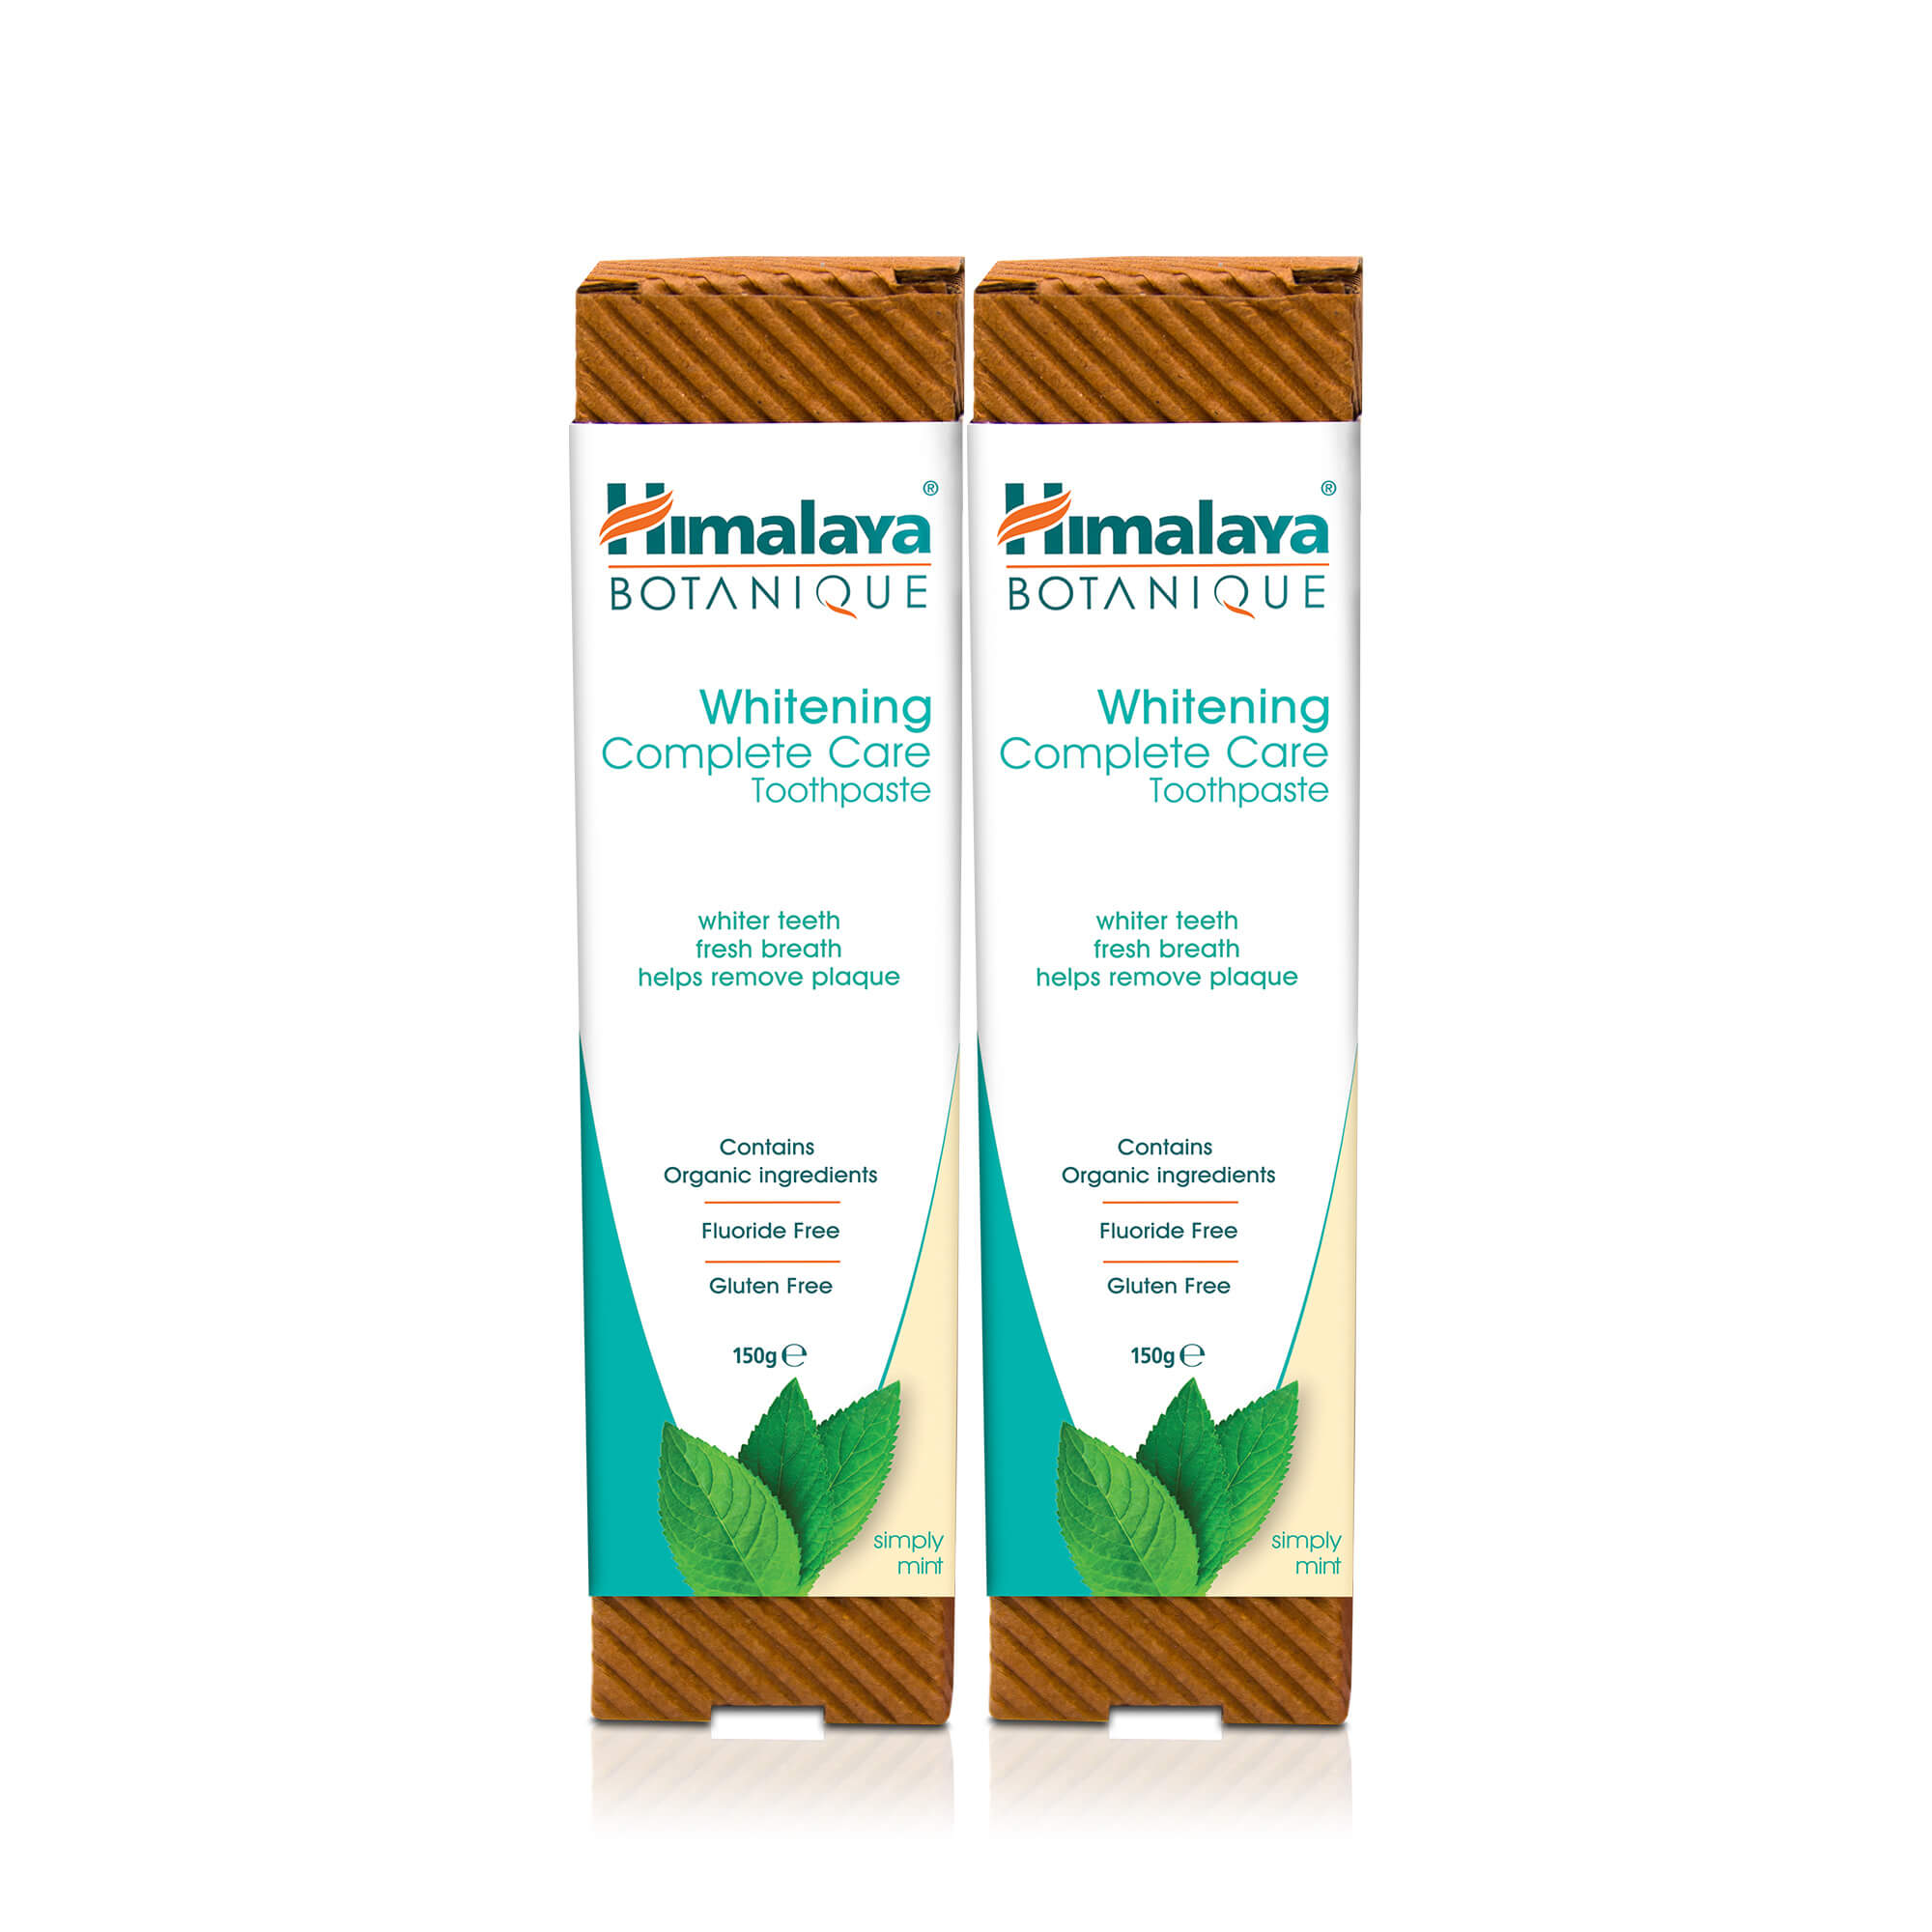 Himalaya BOTANIQUE Whitening Complete Care Toothpaste - Simply Mint - 150g (Pack of 2)